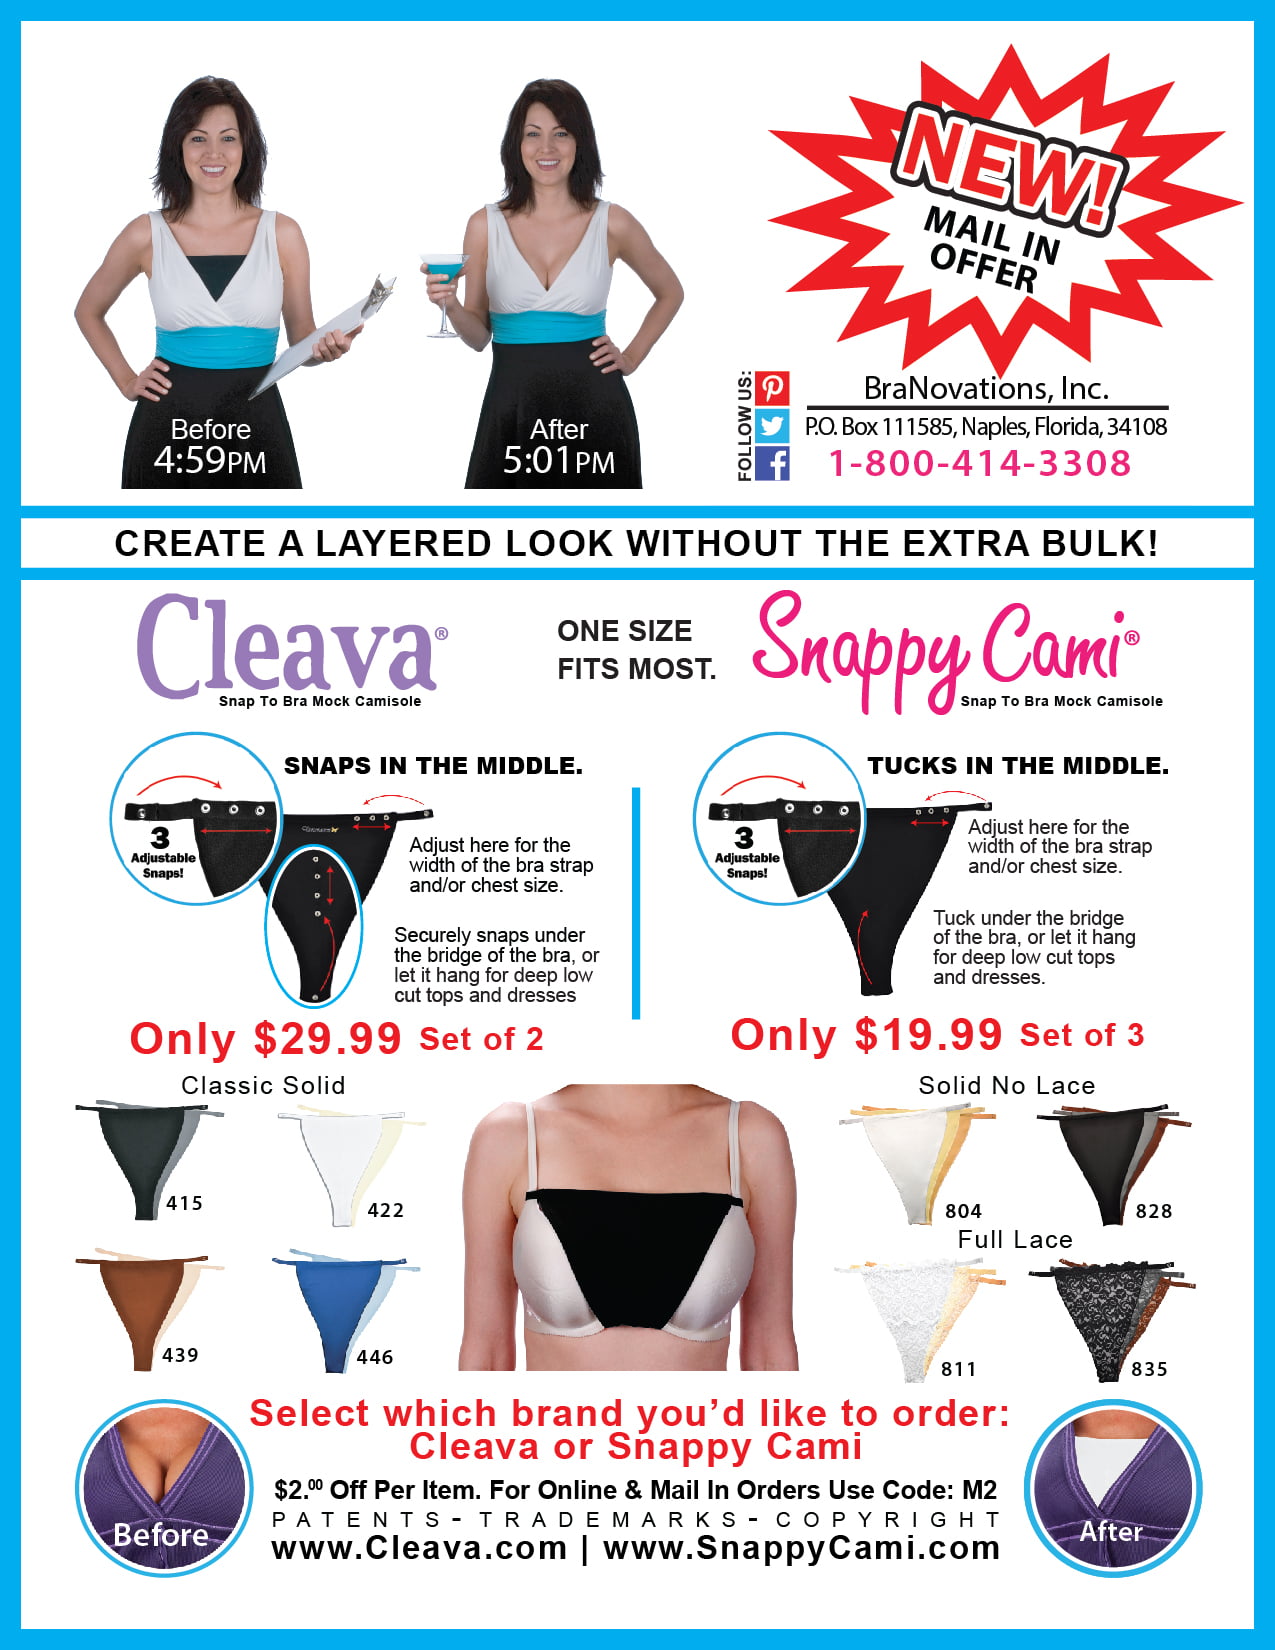 clip on camisole  Clip-on Mock Camisoles Pack of 3 Women Lace